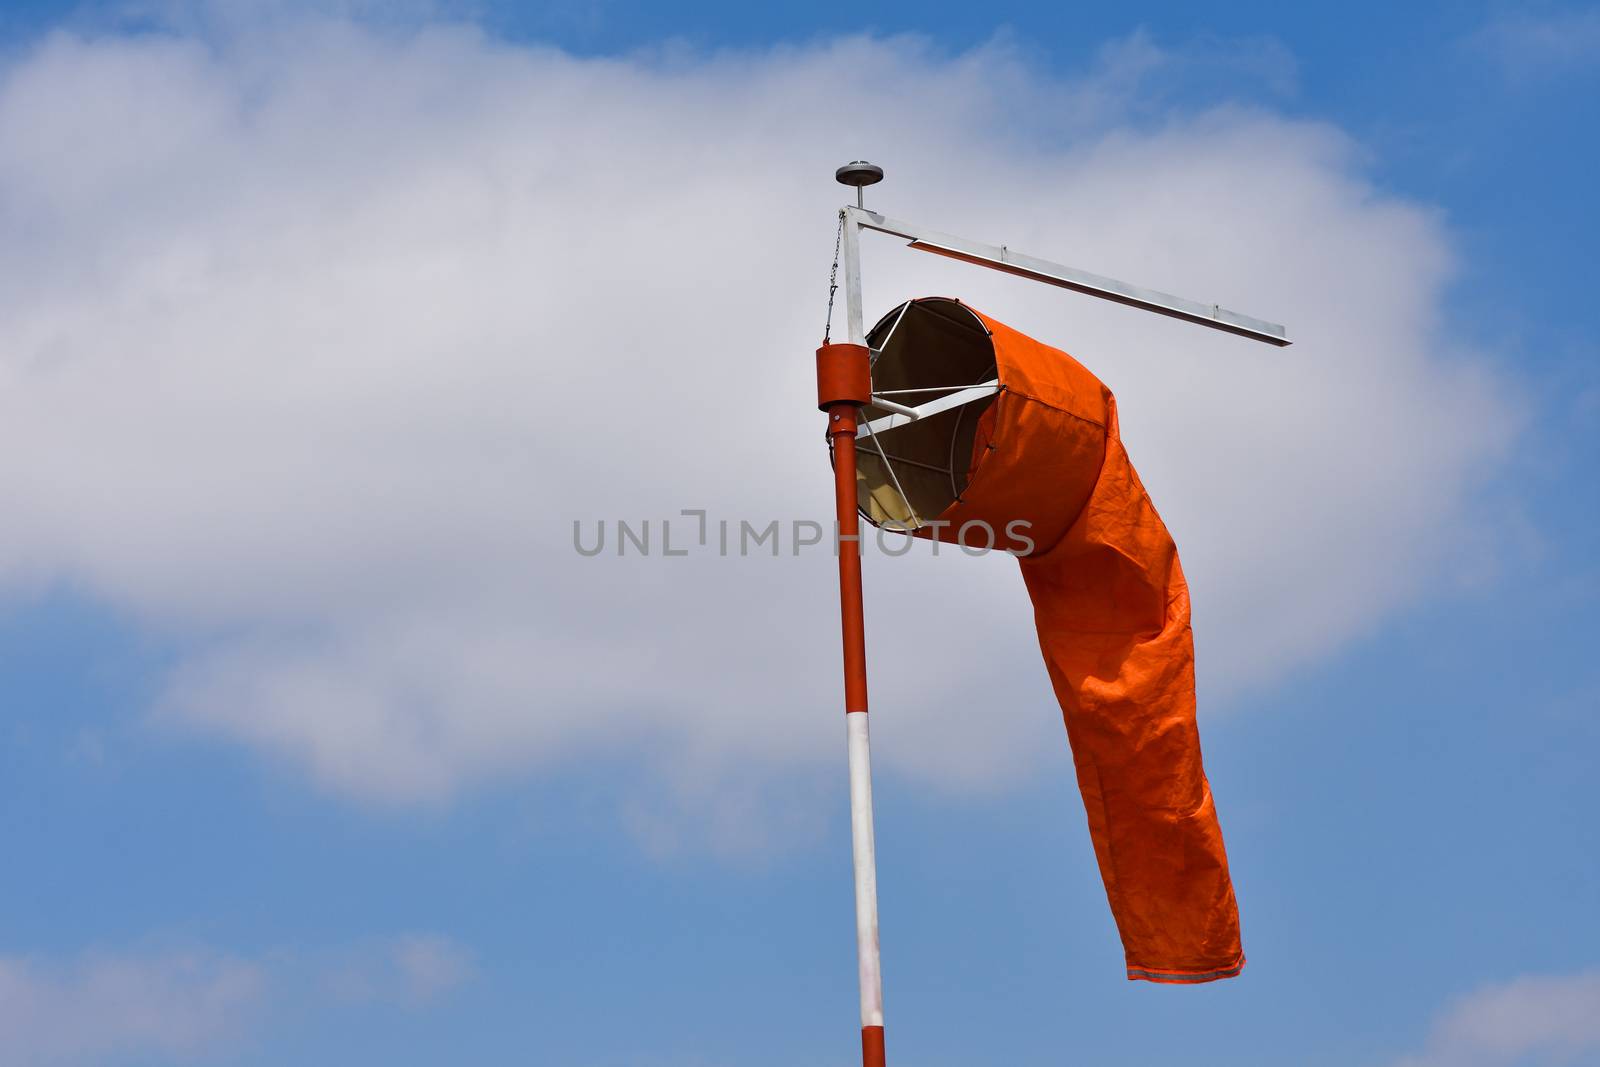 A bright orange wind indication windsock at an airport, Pretoria, South Africa